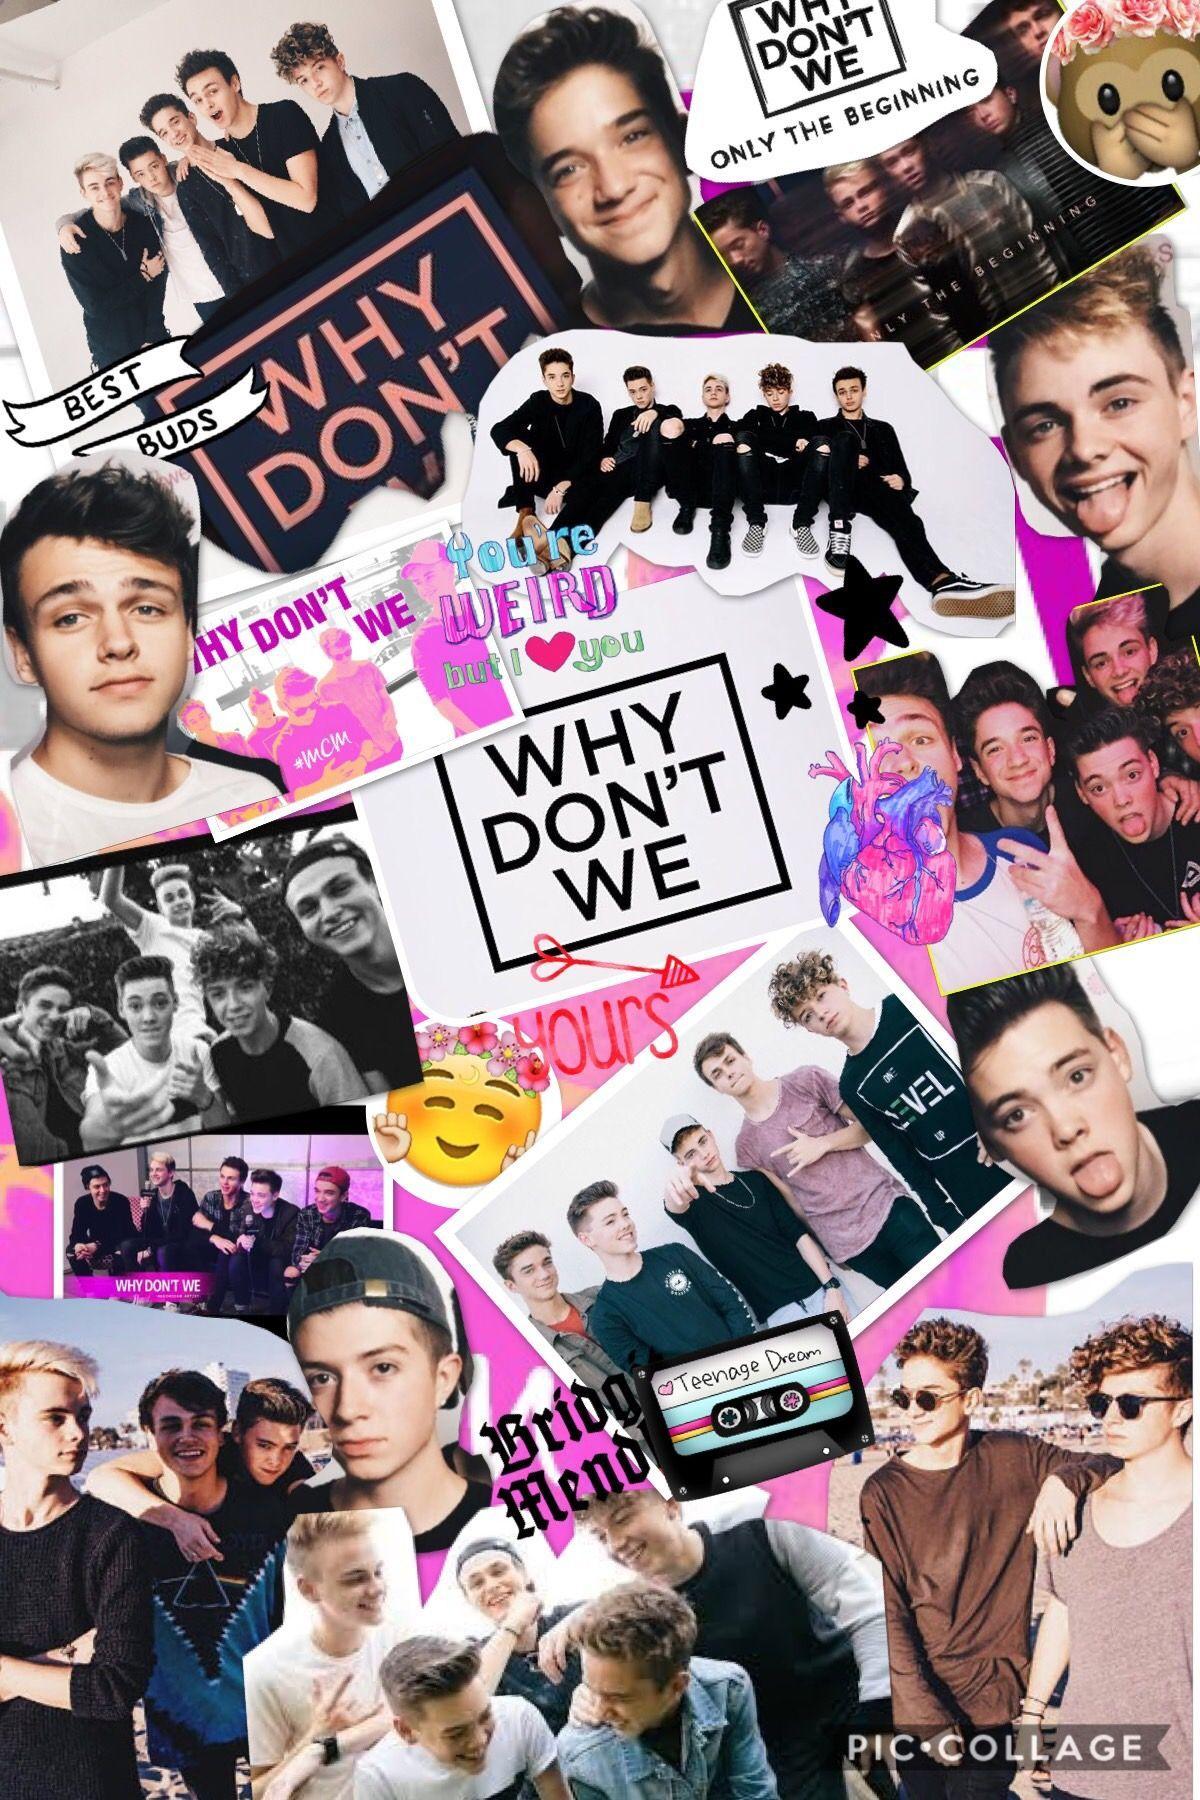 Why don't we band wallpaper. Band wallpaper, Why dont we band, Wdw